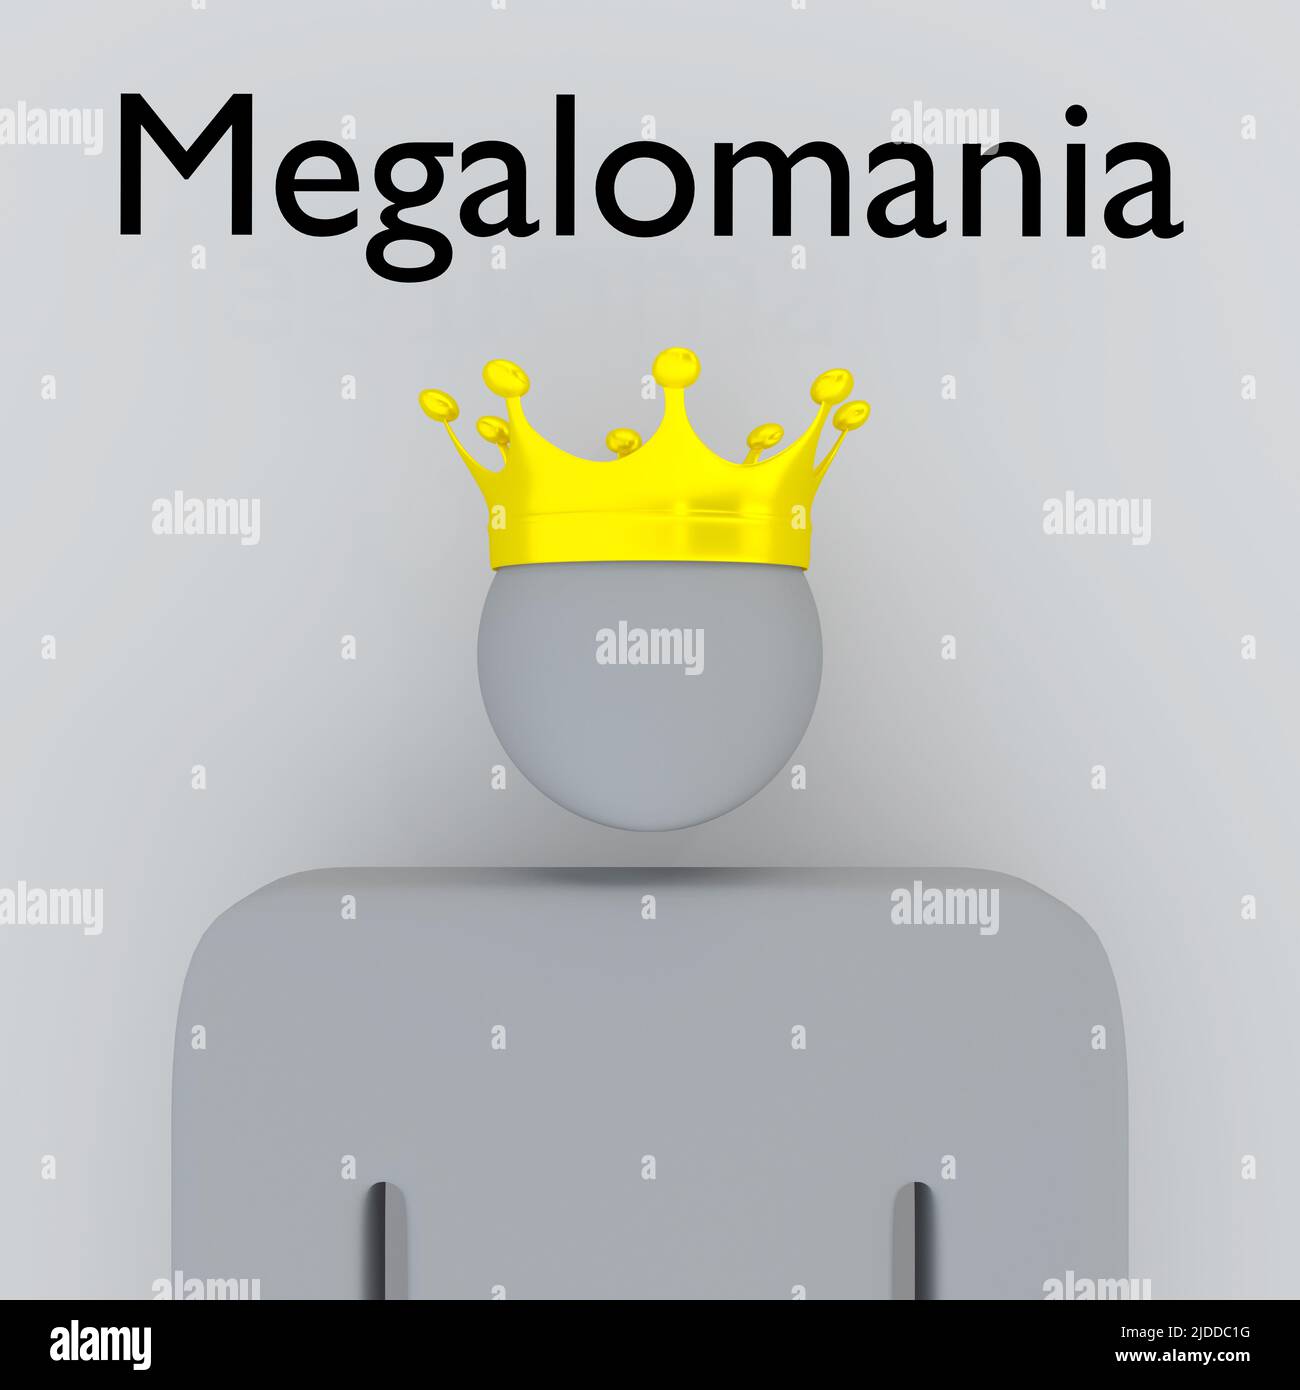 3D illustration of Megalomania script above a head silhouette with a golden crown Stock Photo